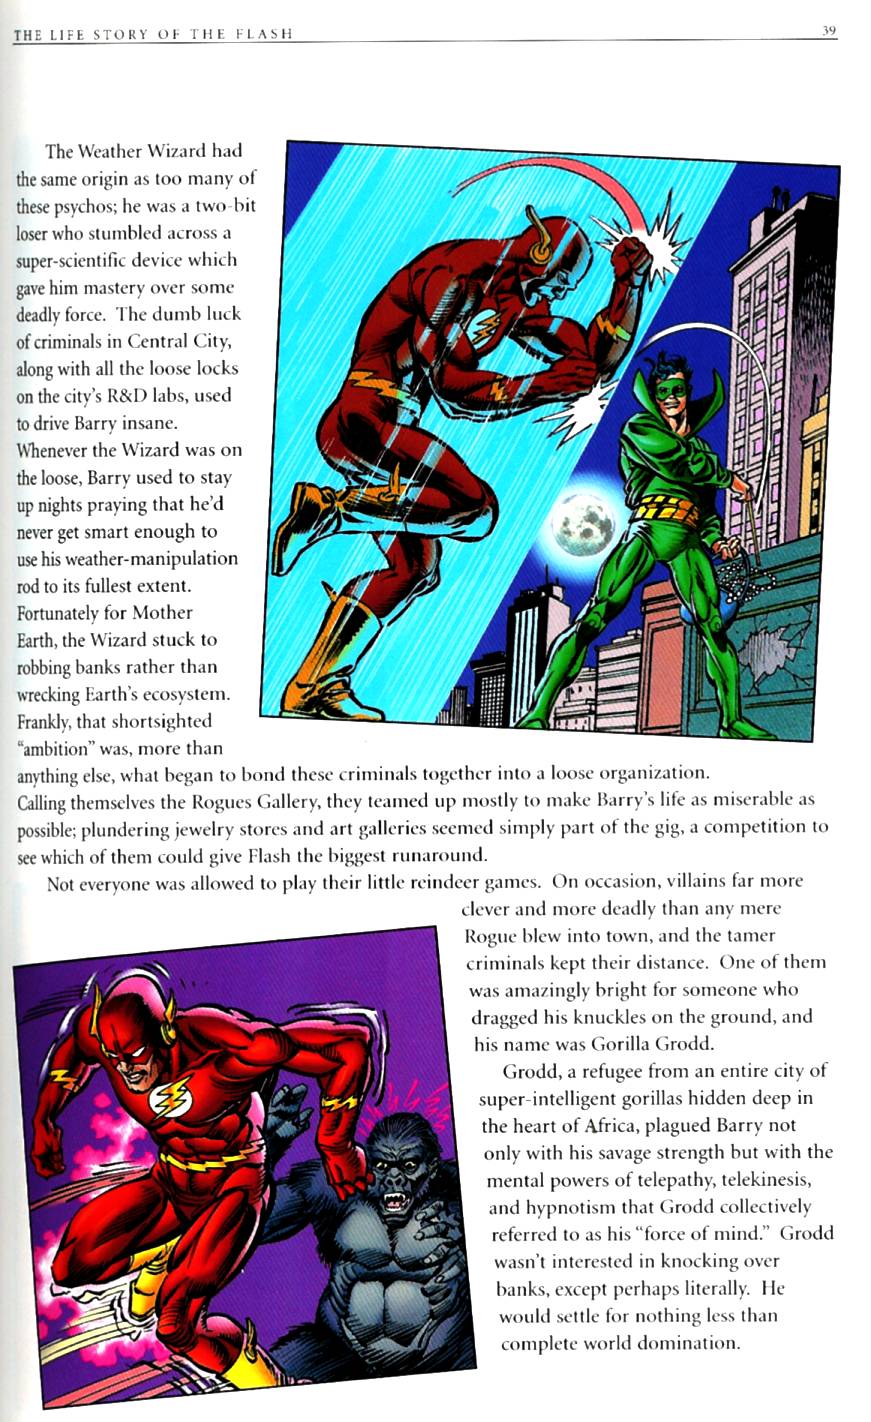 Read online The Life Story of the Flash comic -  Issue # Full - 41